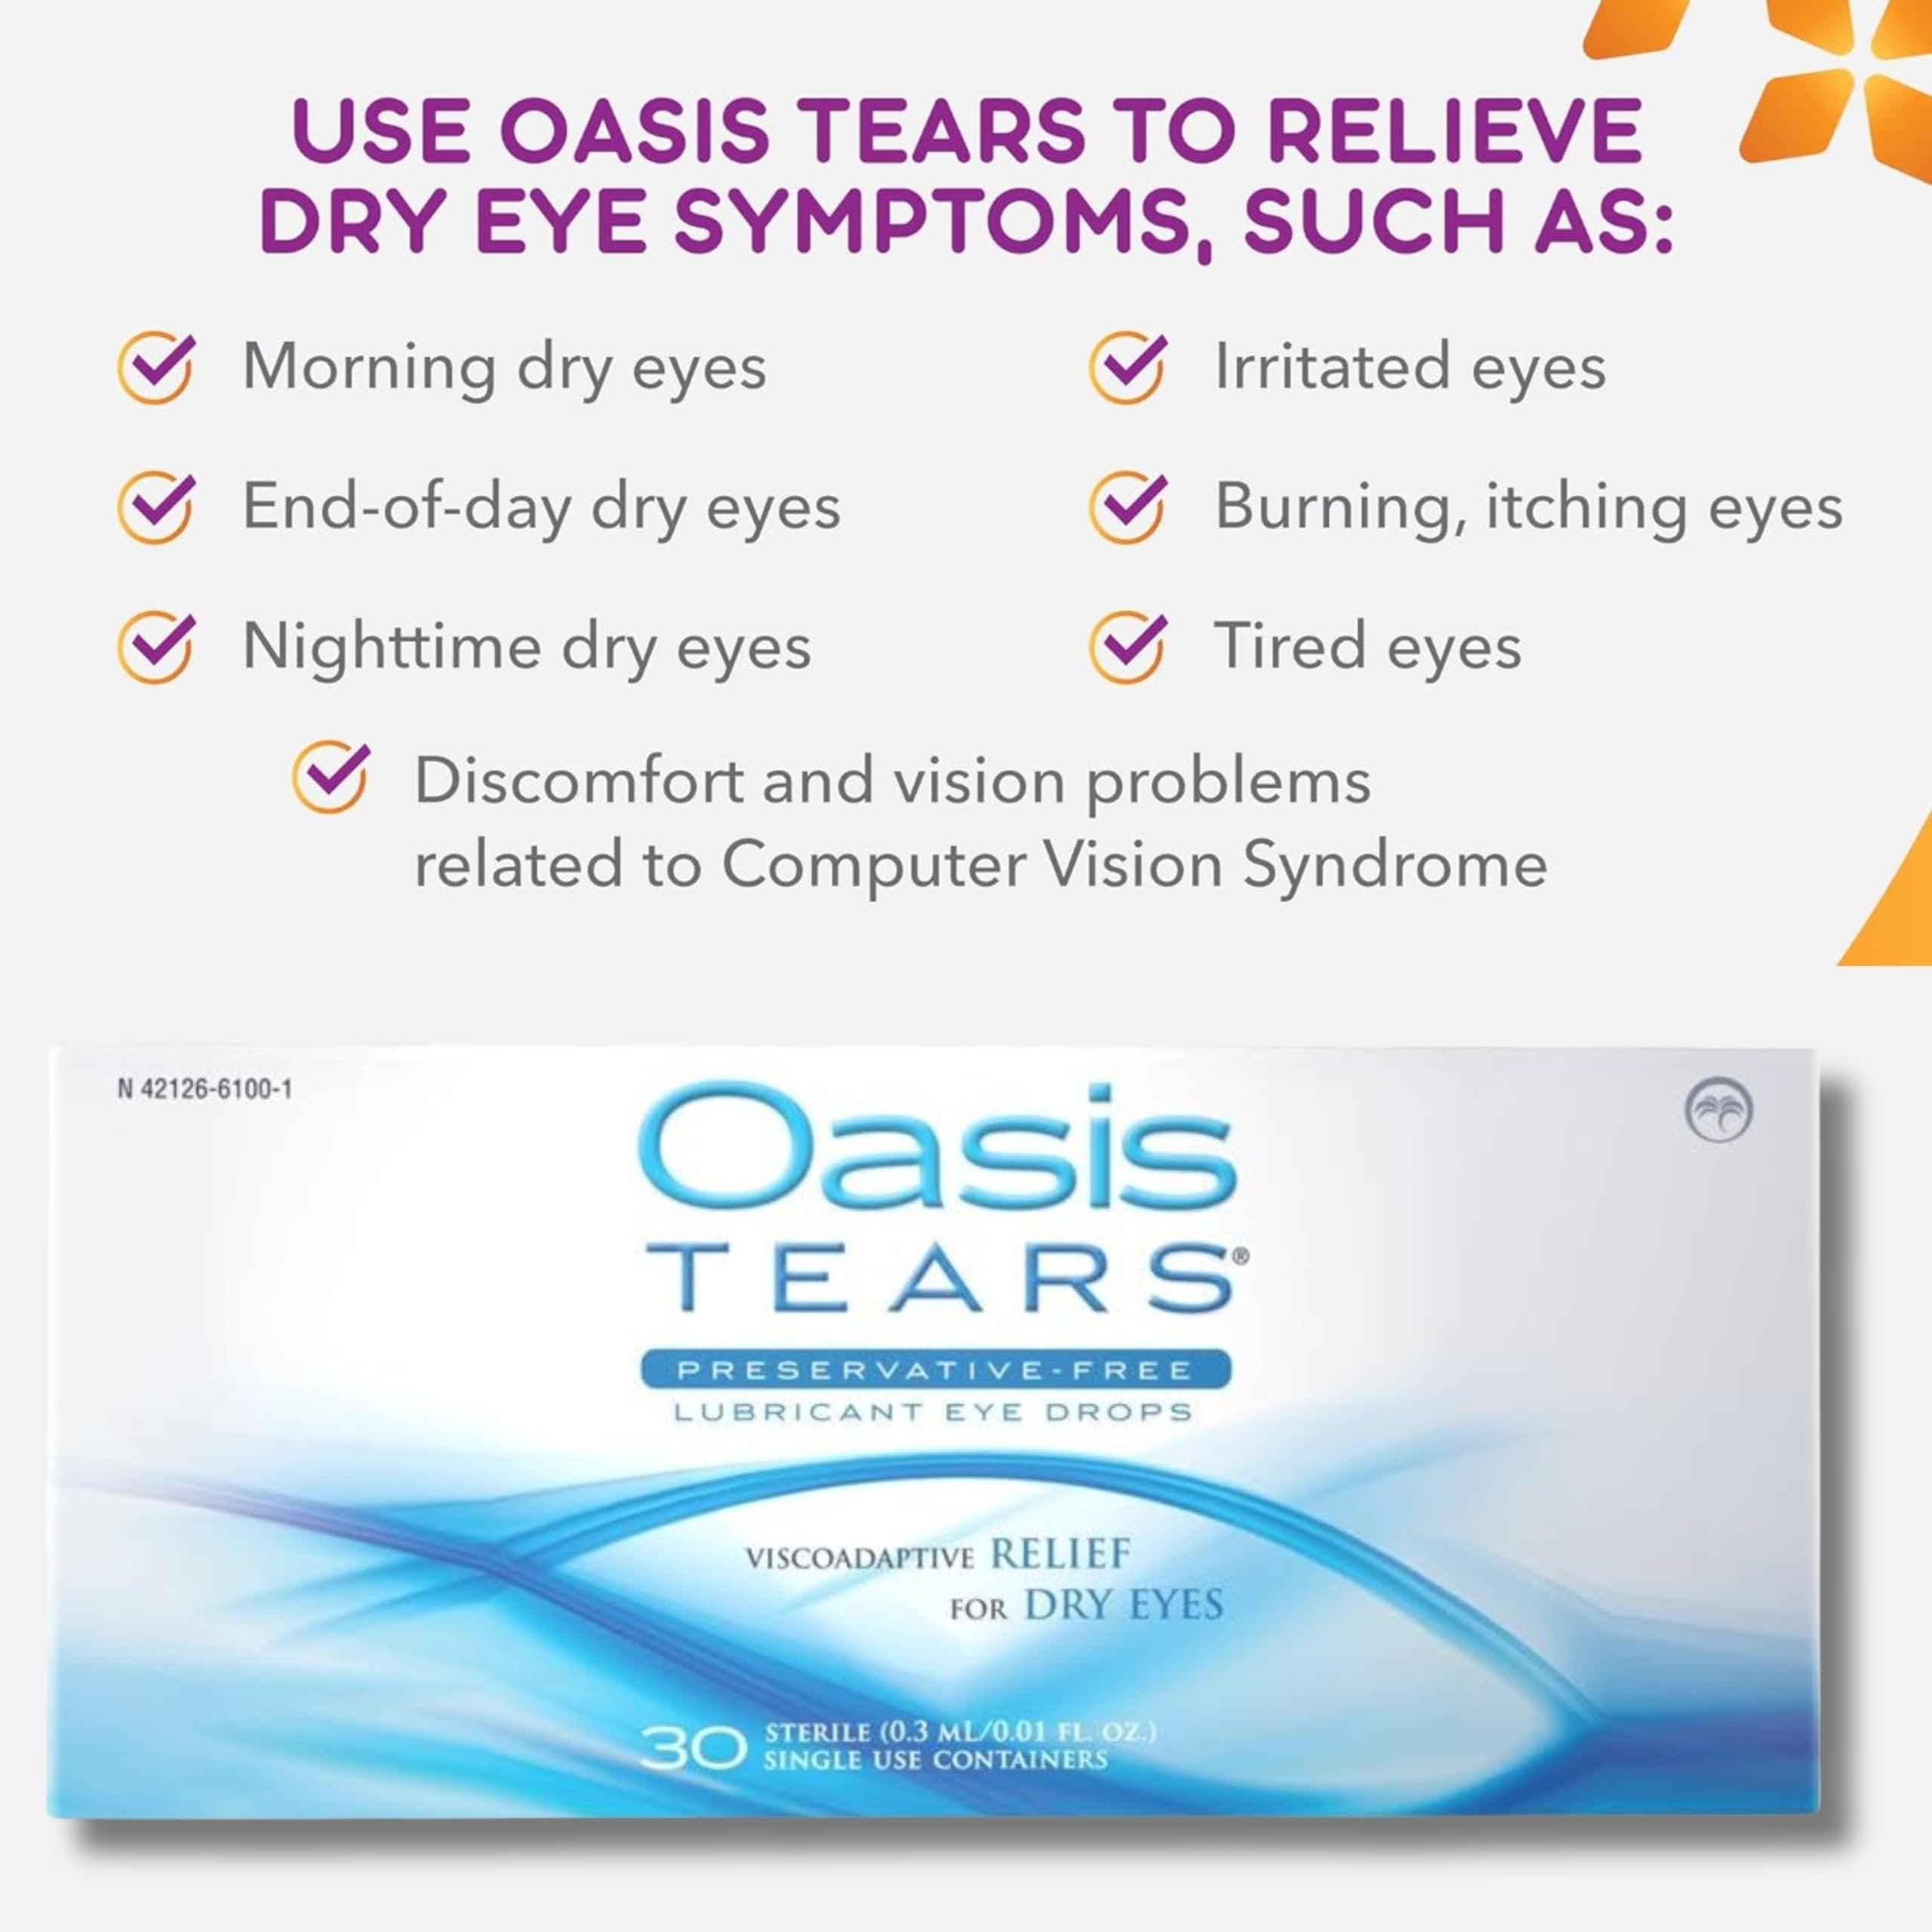 Oasis TEARS Original Lubricant Eye Drops Relief for Dry Eyes, Coat, Lubricate, & Moisten Delicate Eye Tissue, Continued Relief of Irritated Eyes 30 Count Box Sterile Disposable Containers (Pack of 2)